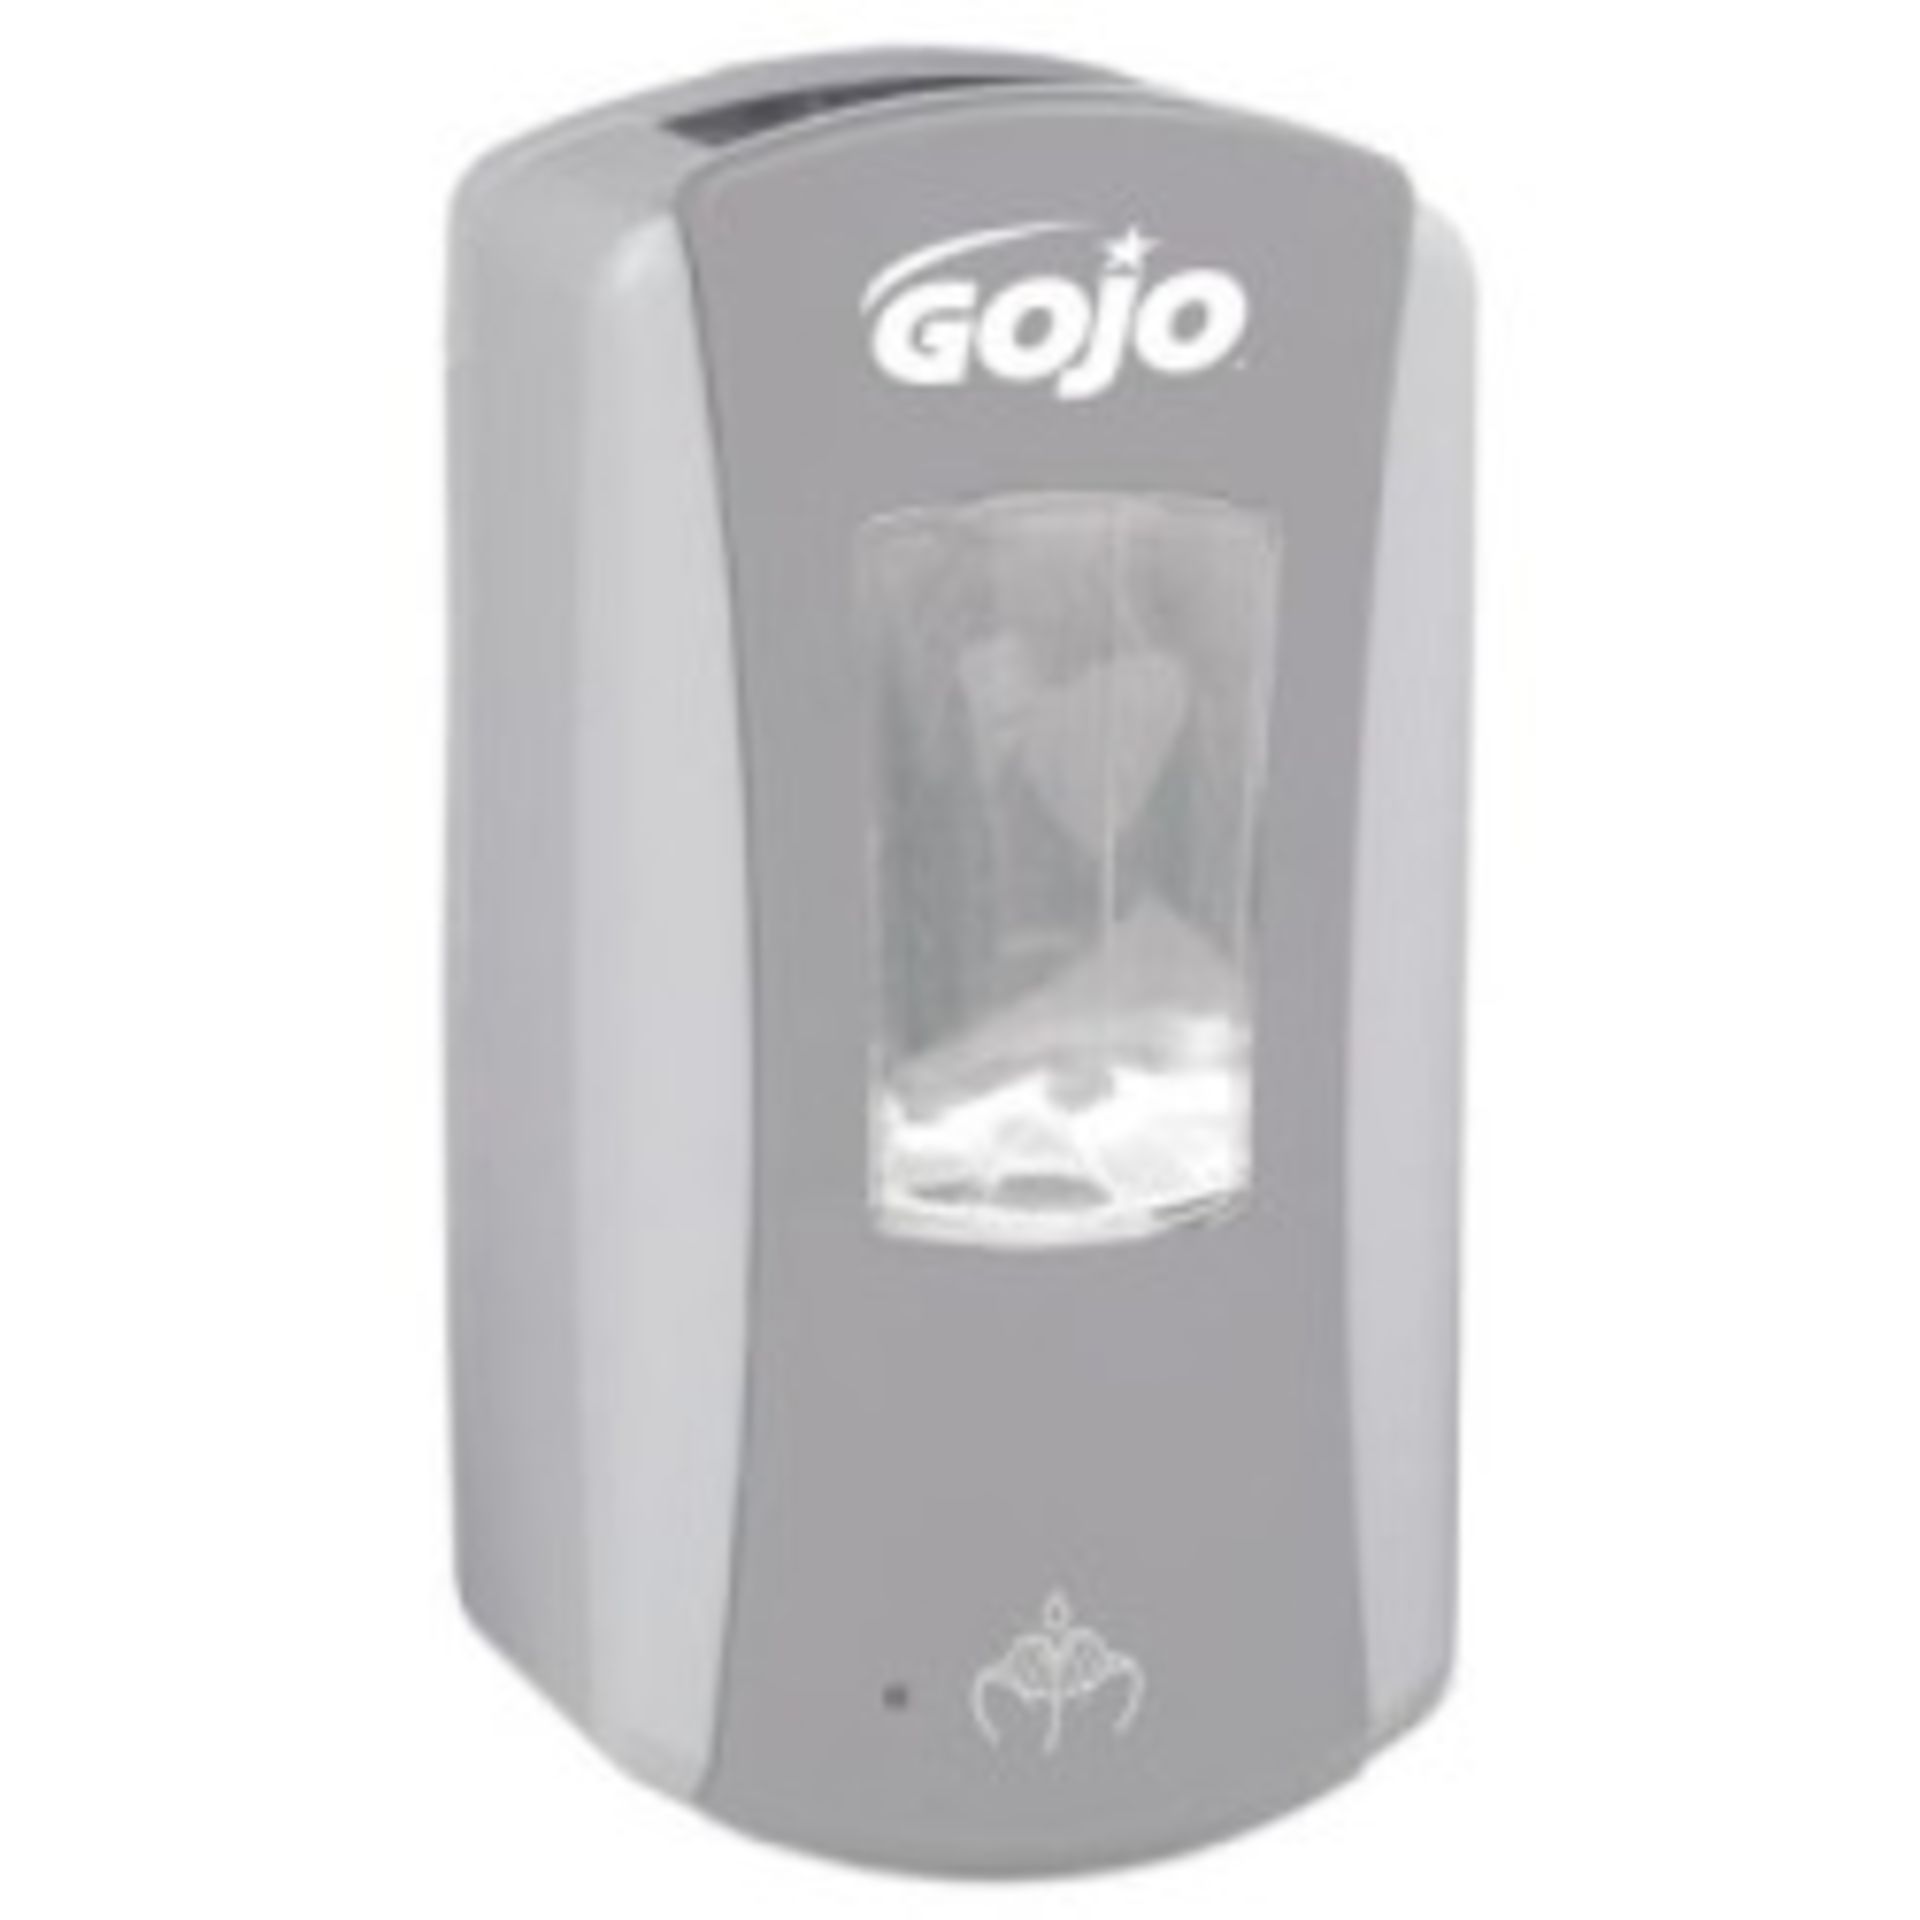 V Brand New A Lot Of Four 1200ml Gojo Grey/White Hands Free Soap Dispensers ISP £19.99 Each (